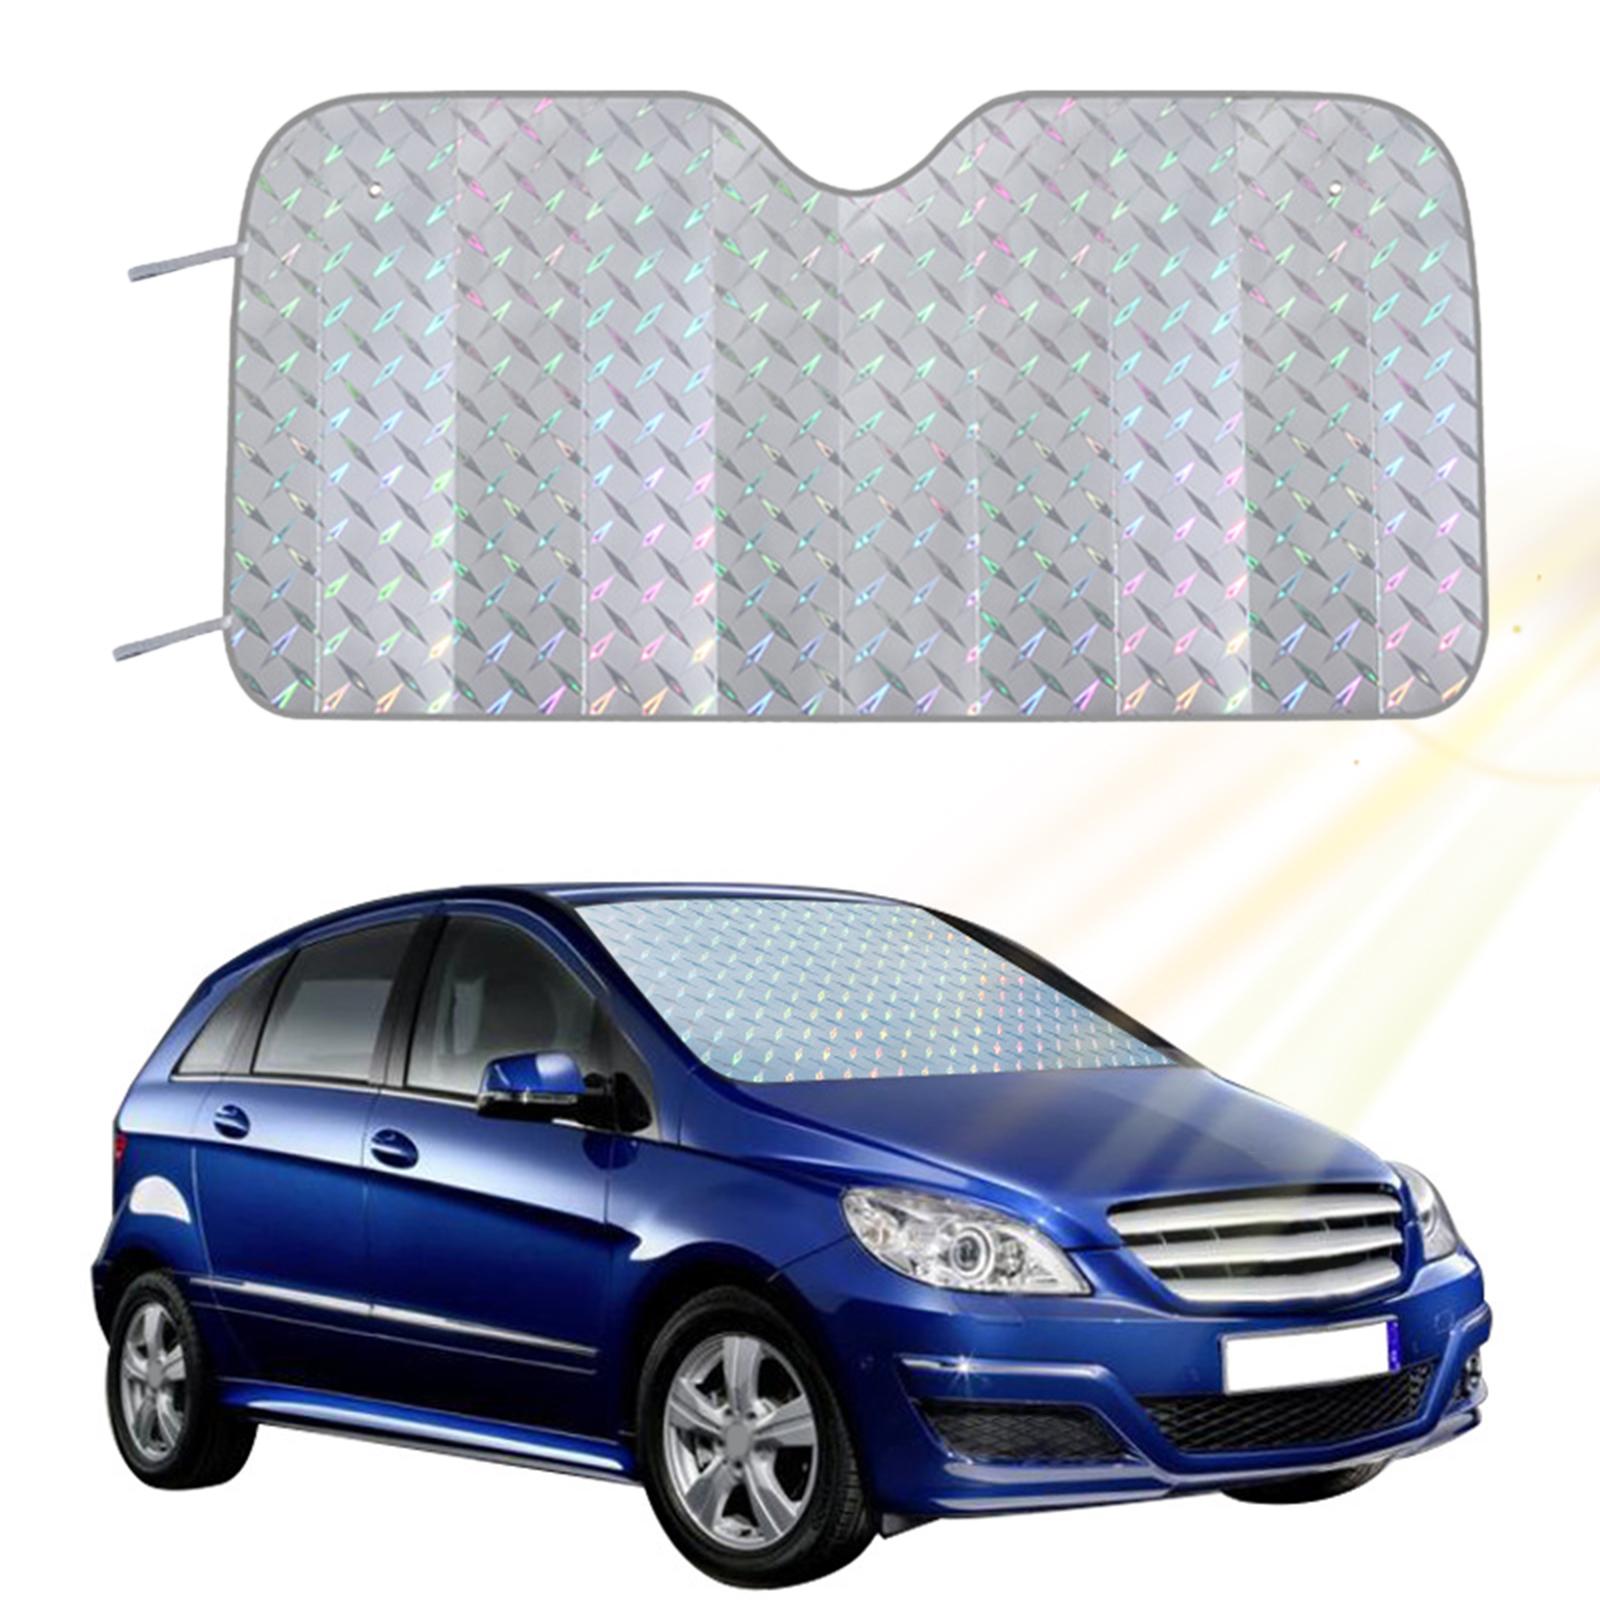 Car Windshield Sunshade Sun Protection Car Parts Save Space Windshield Cover 130cmx70cm